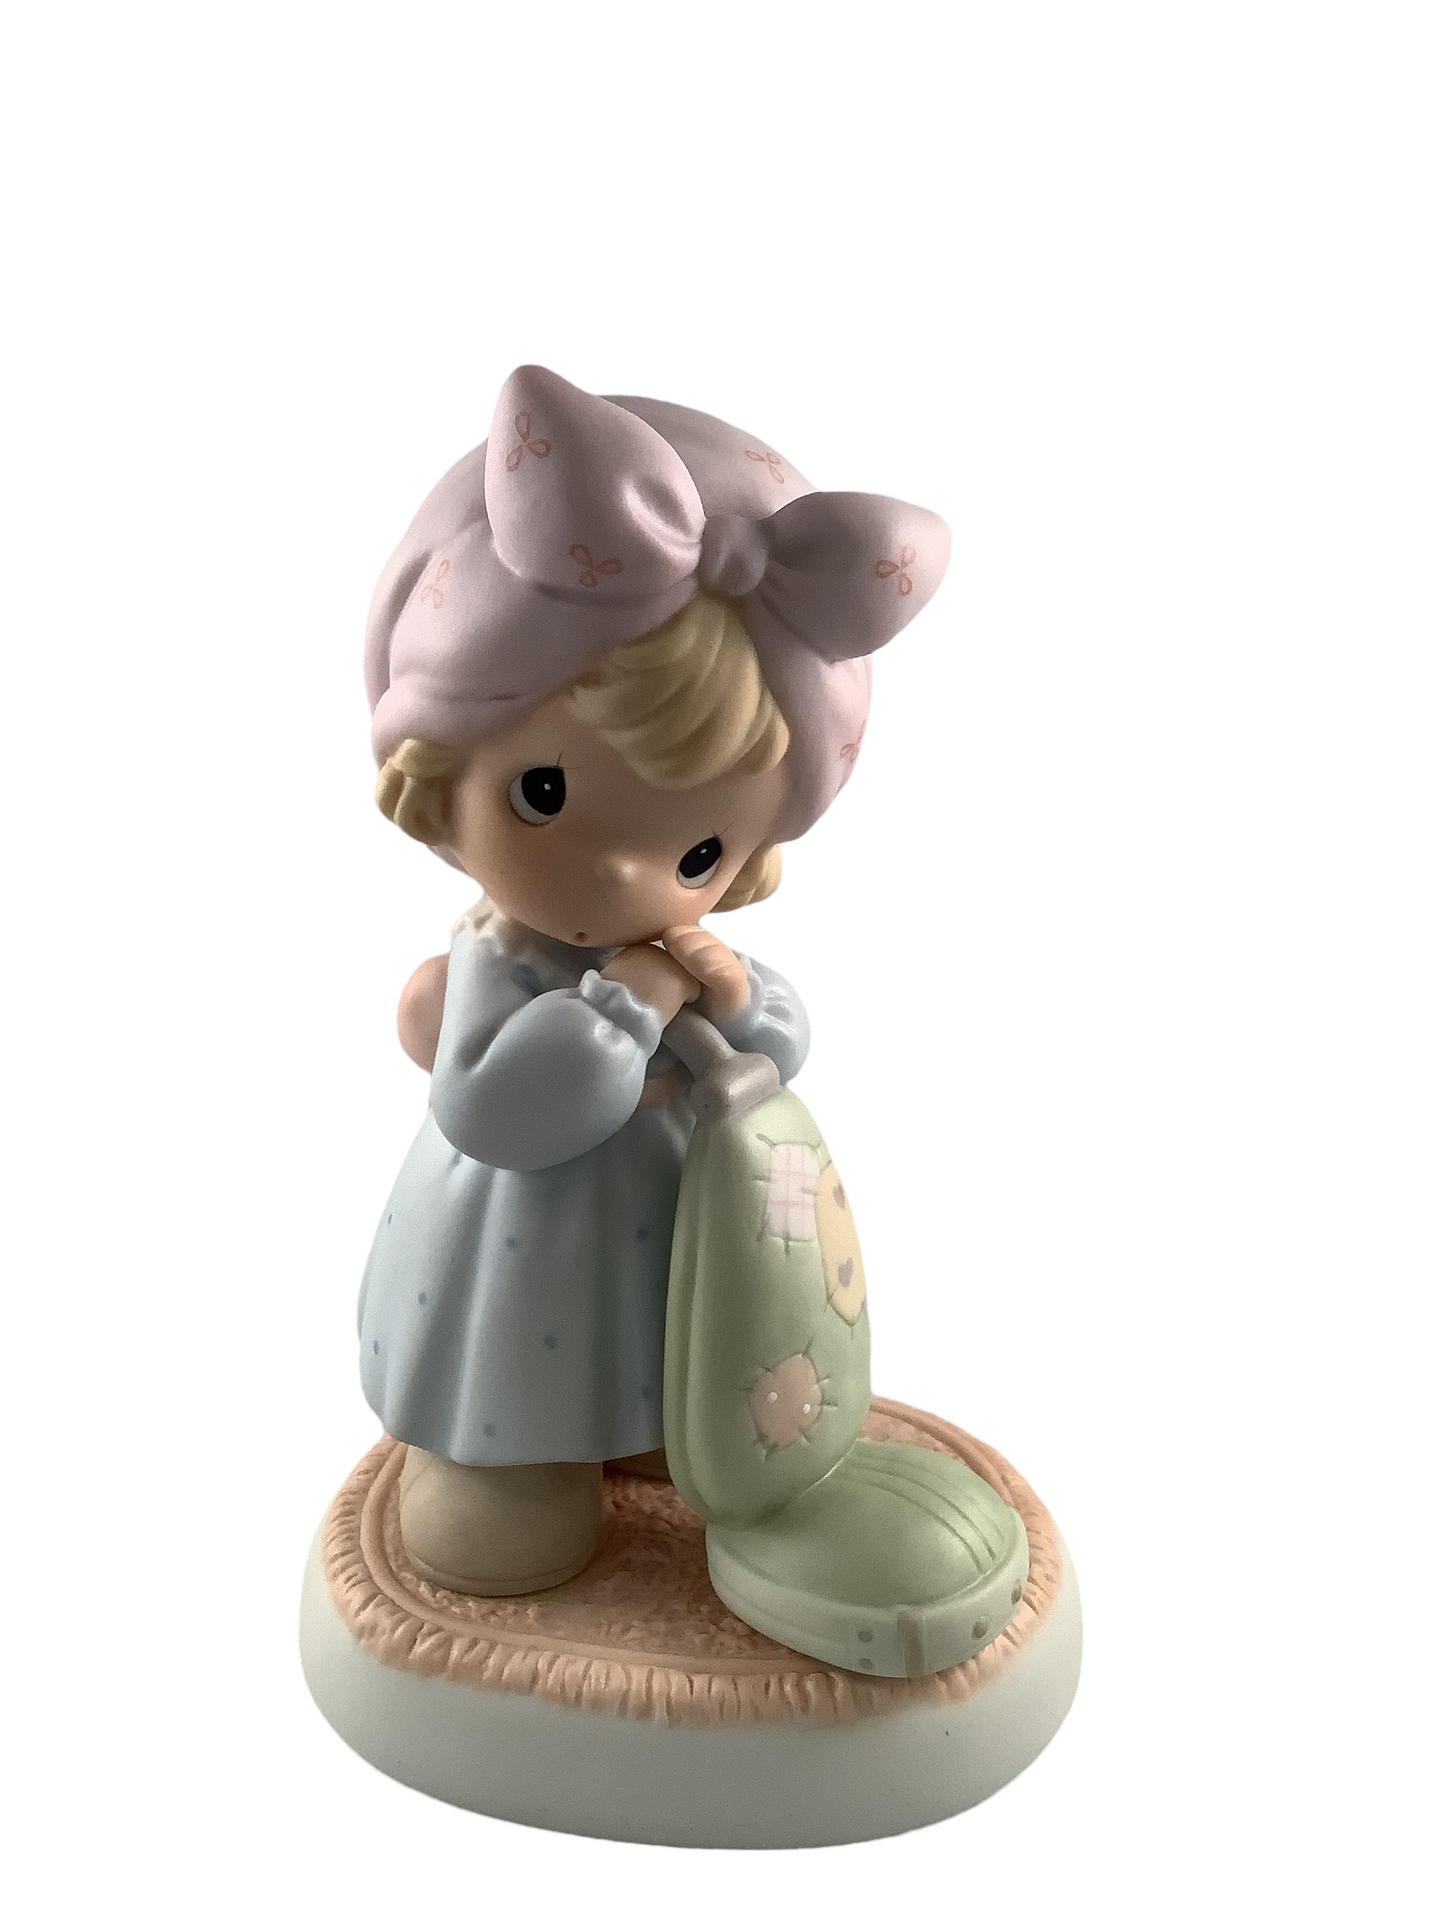 My Life Is A Vacuum Without You - Precious Moment Figurine